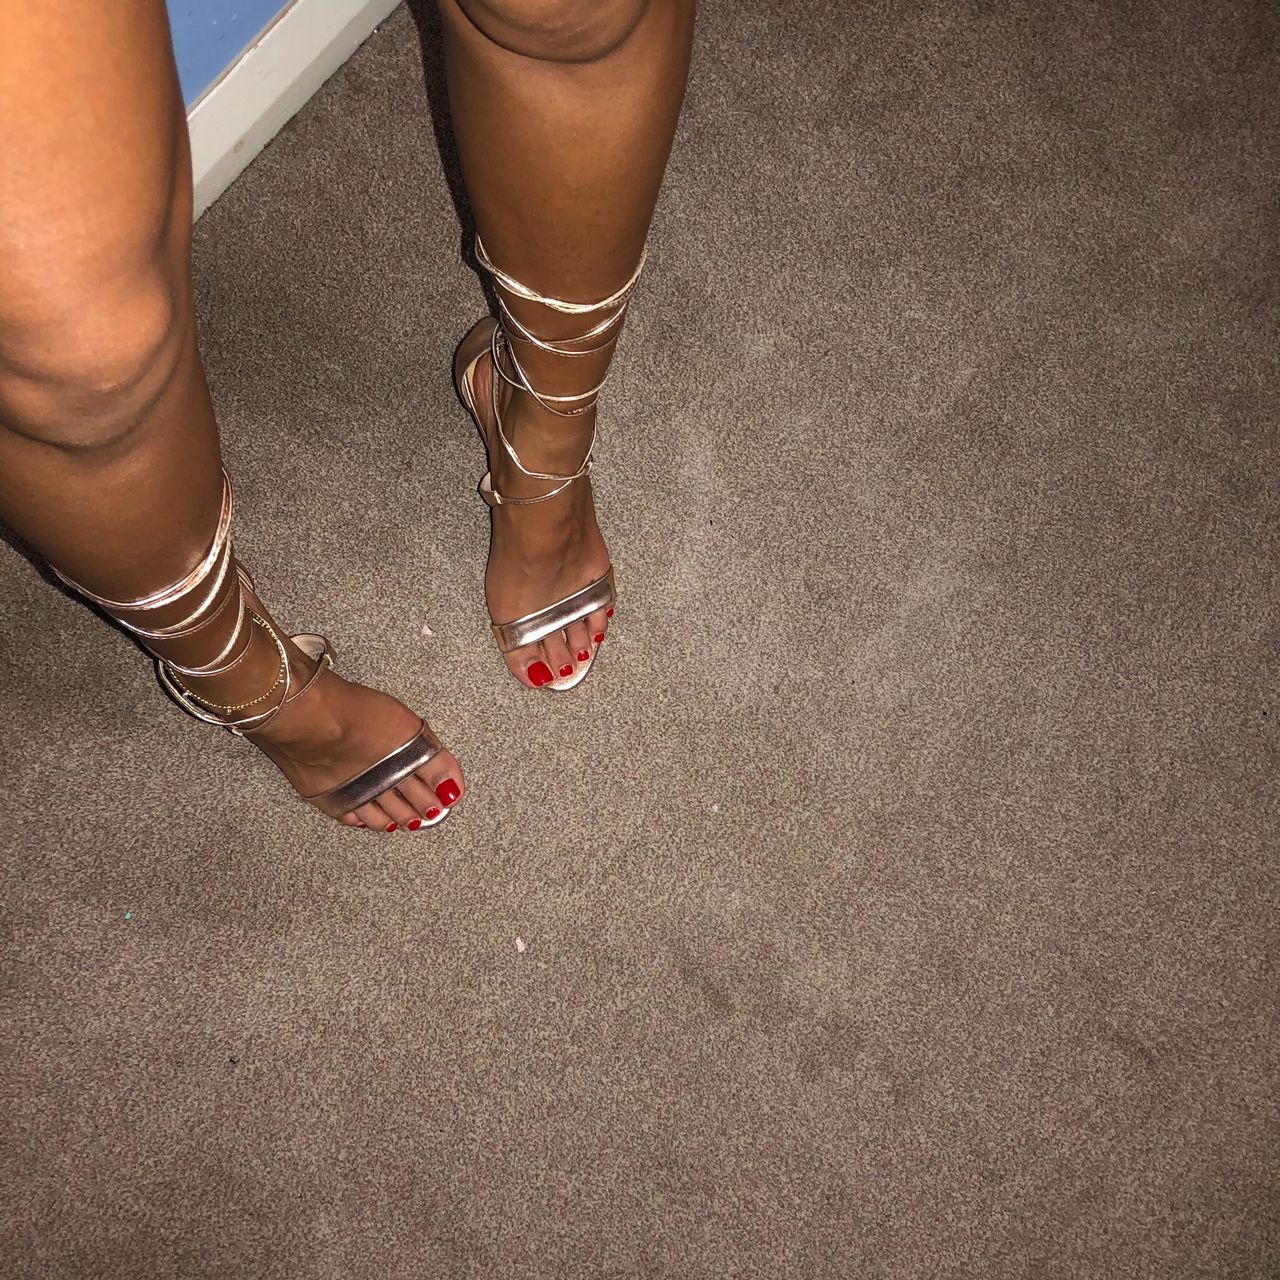 Arya Sf Gold Heels And Red Toes